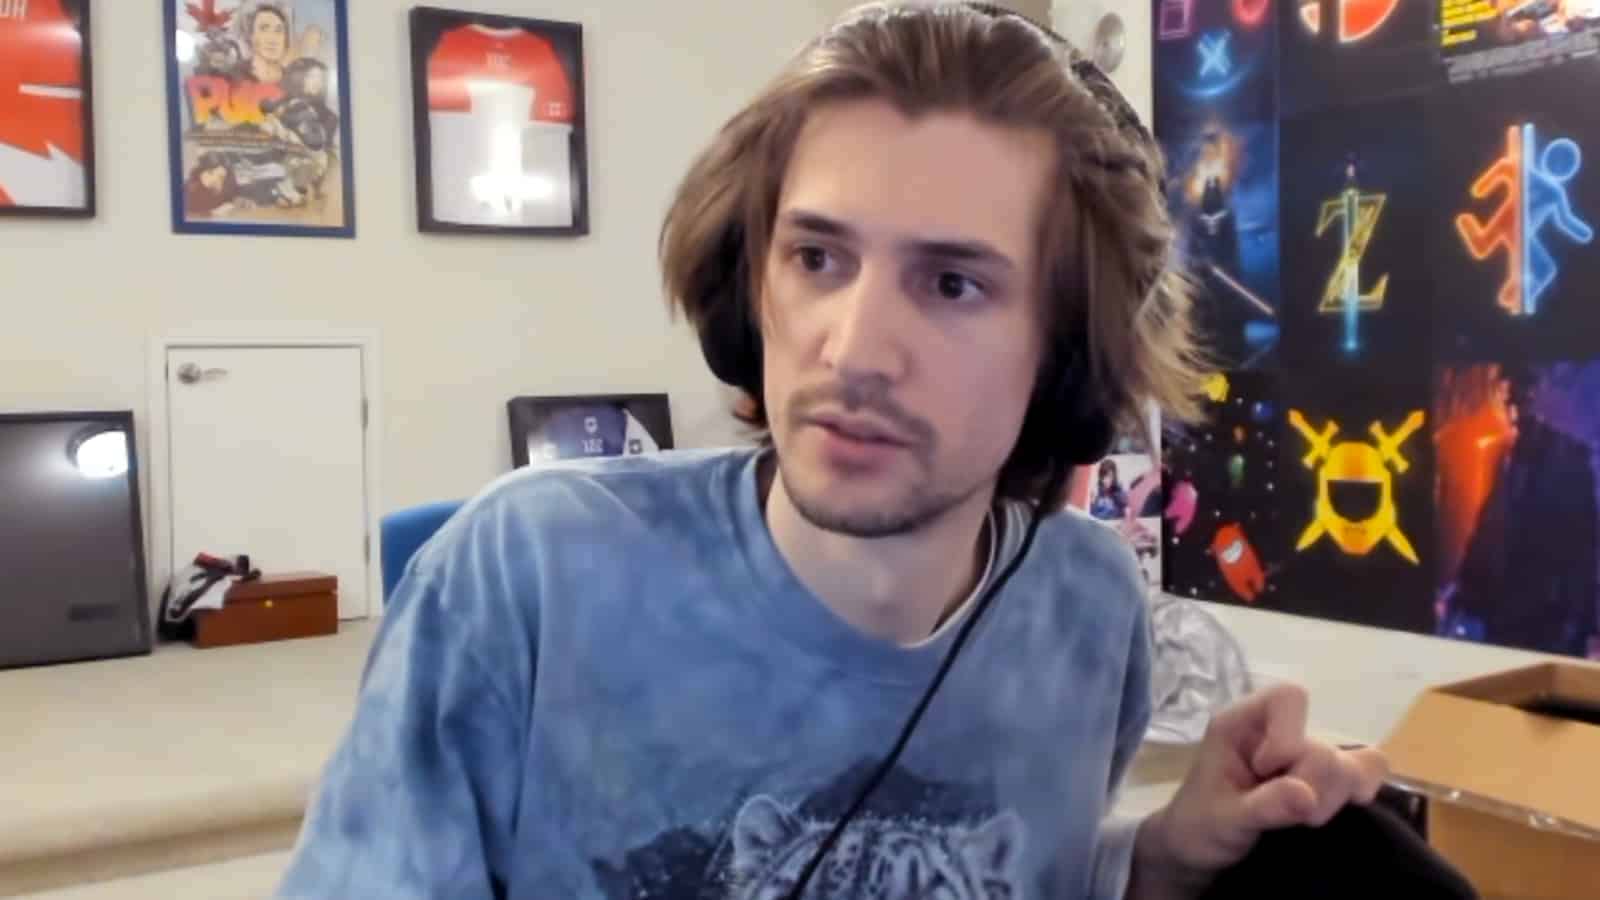 xQc slams Twitch streamers for “ganging up” on him over Olympics DMCA drama